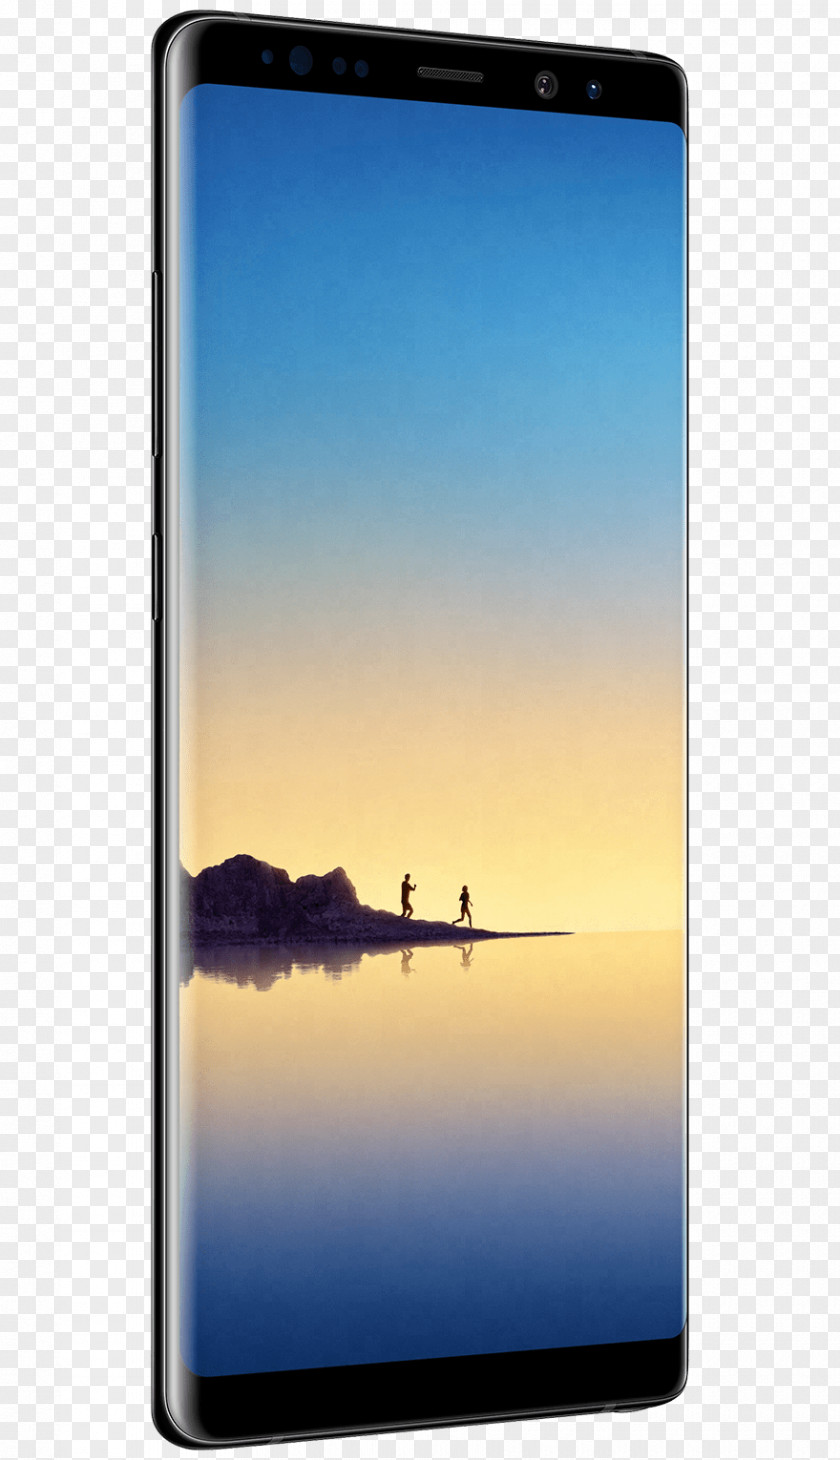 Samsung Galaxy S8 Android Smartphone Stylus PNG